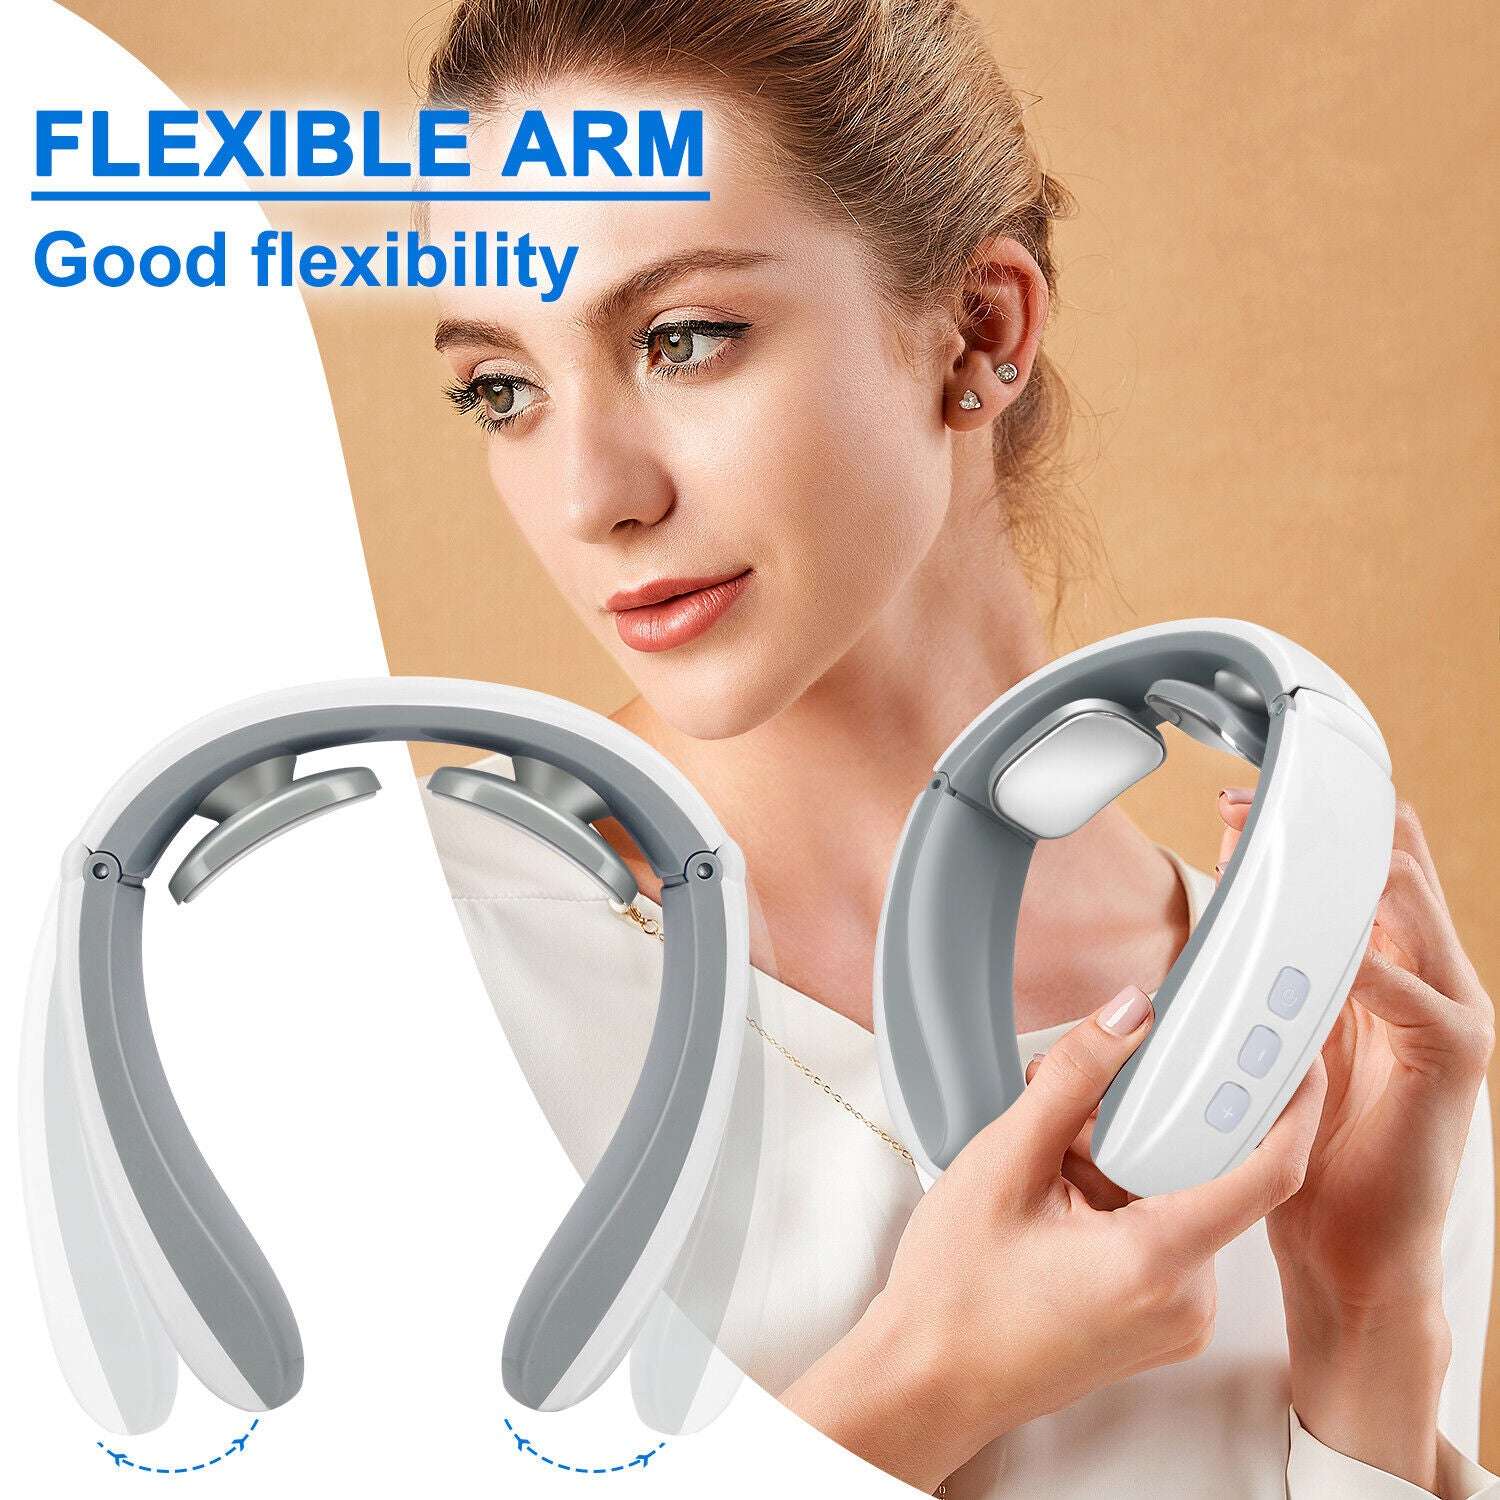 RelaxPro Neck Pulse Massager - Gifting By Julia M